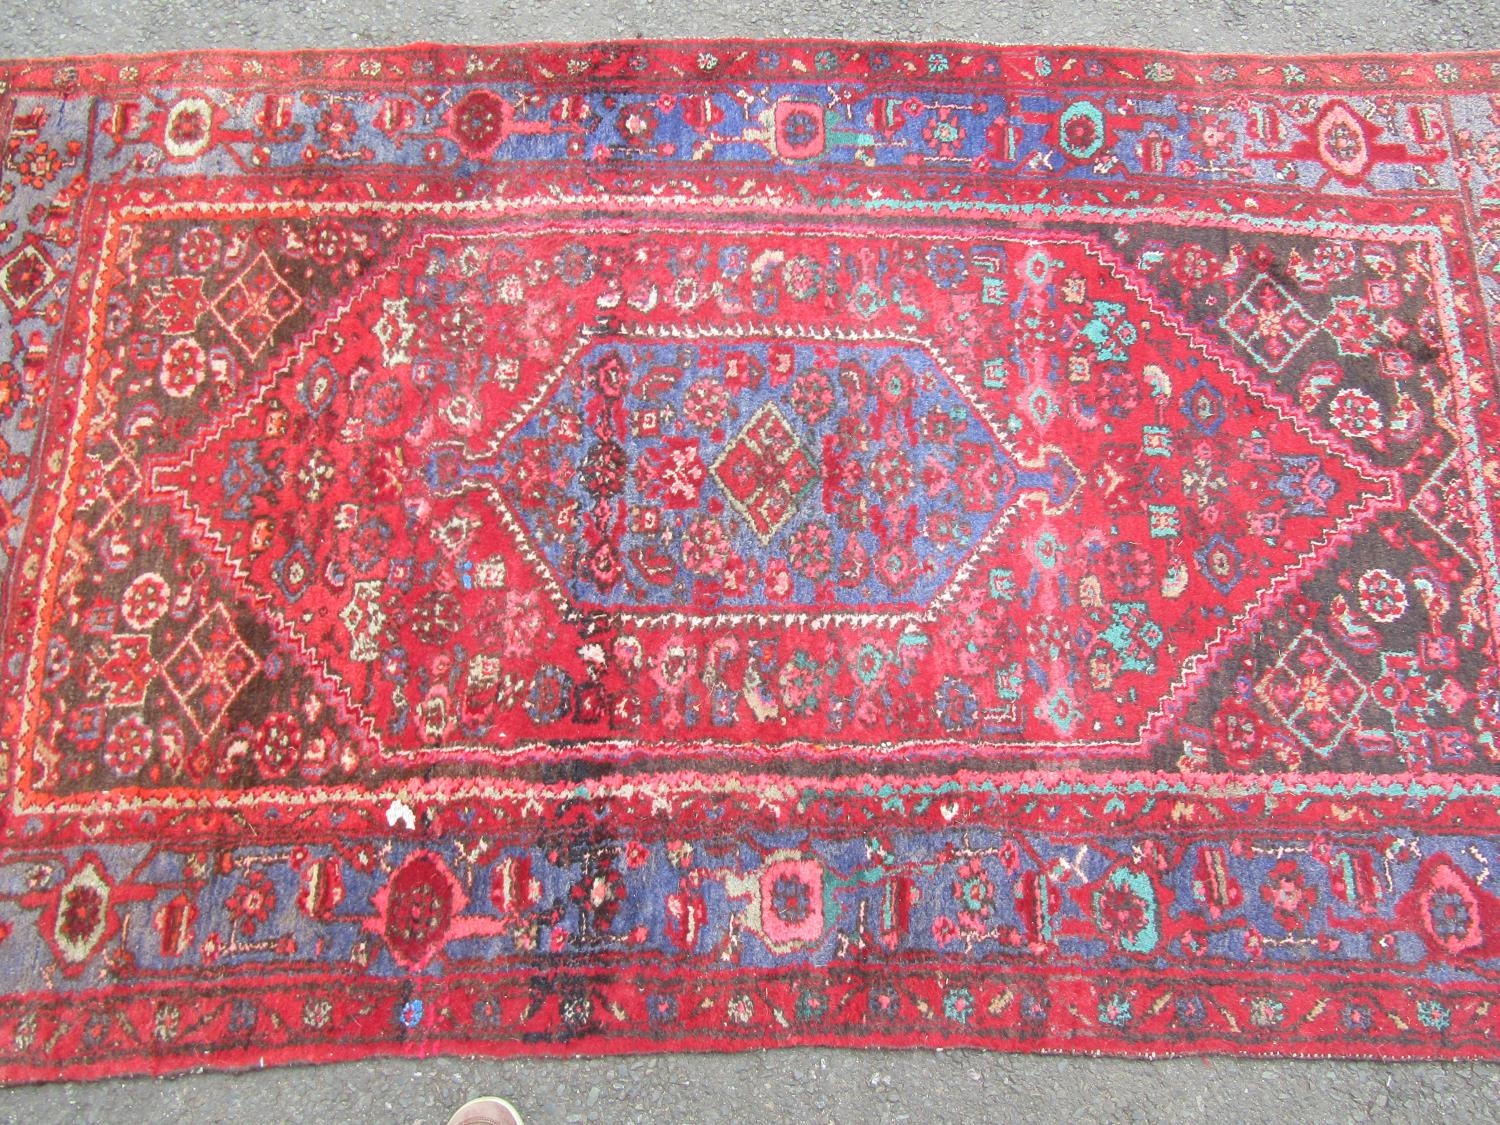 An old Middle Eastern rug with a central medallion and stylised floral pattern, 221cm x 131cm. - Image 2 of 3